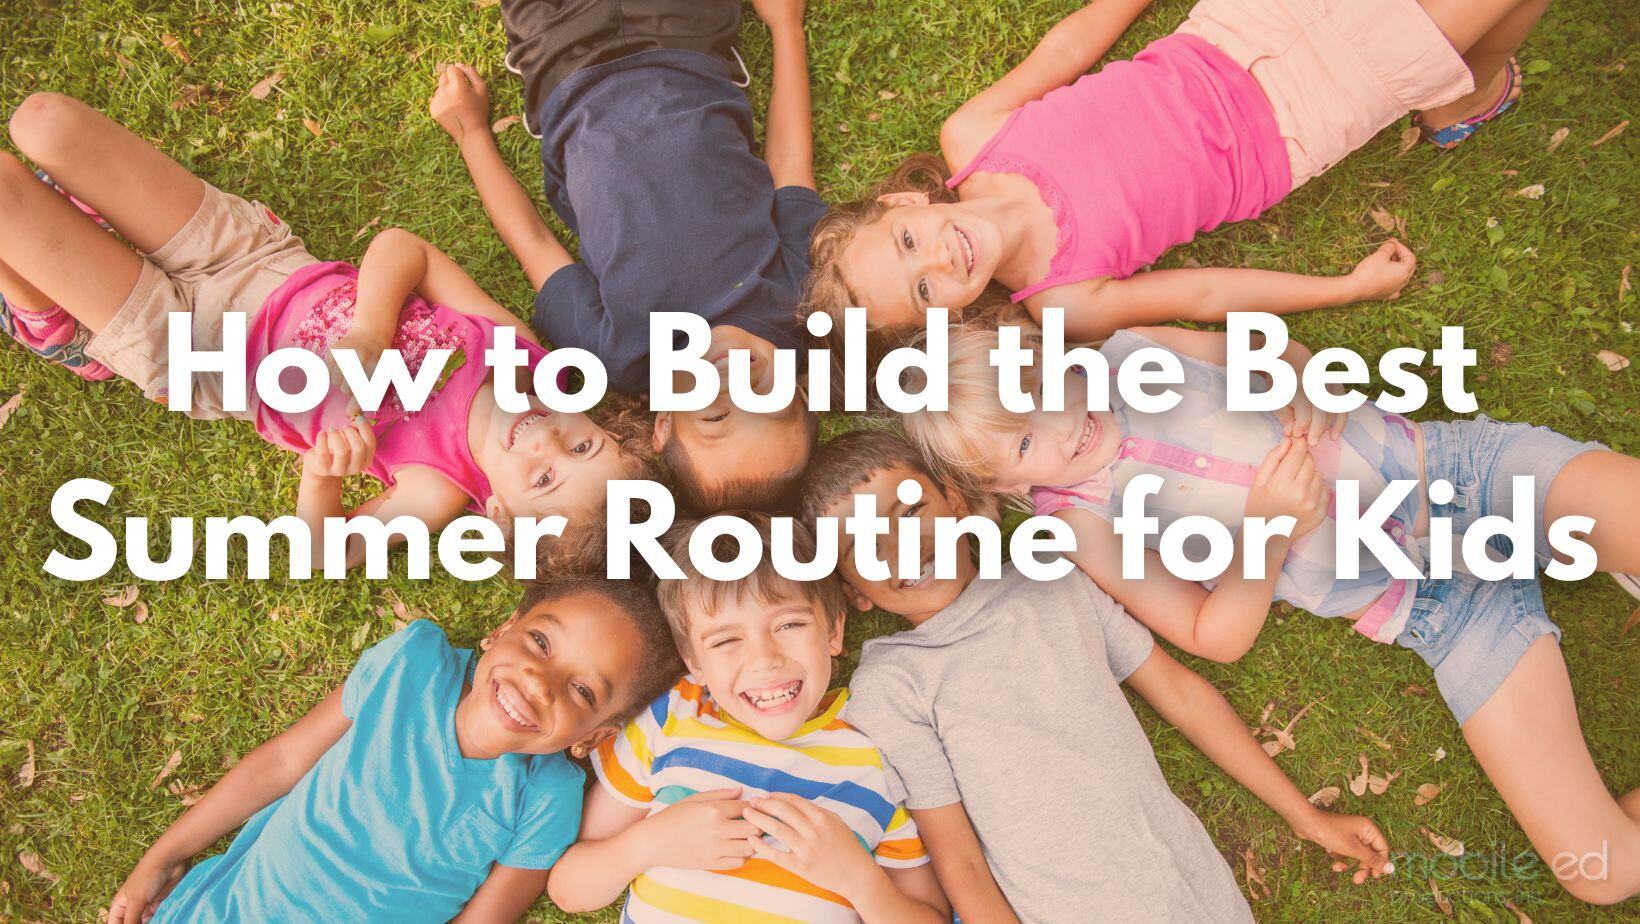 How to Build the Best Summer Routine for Kids